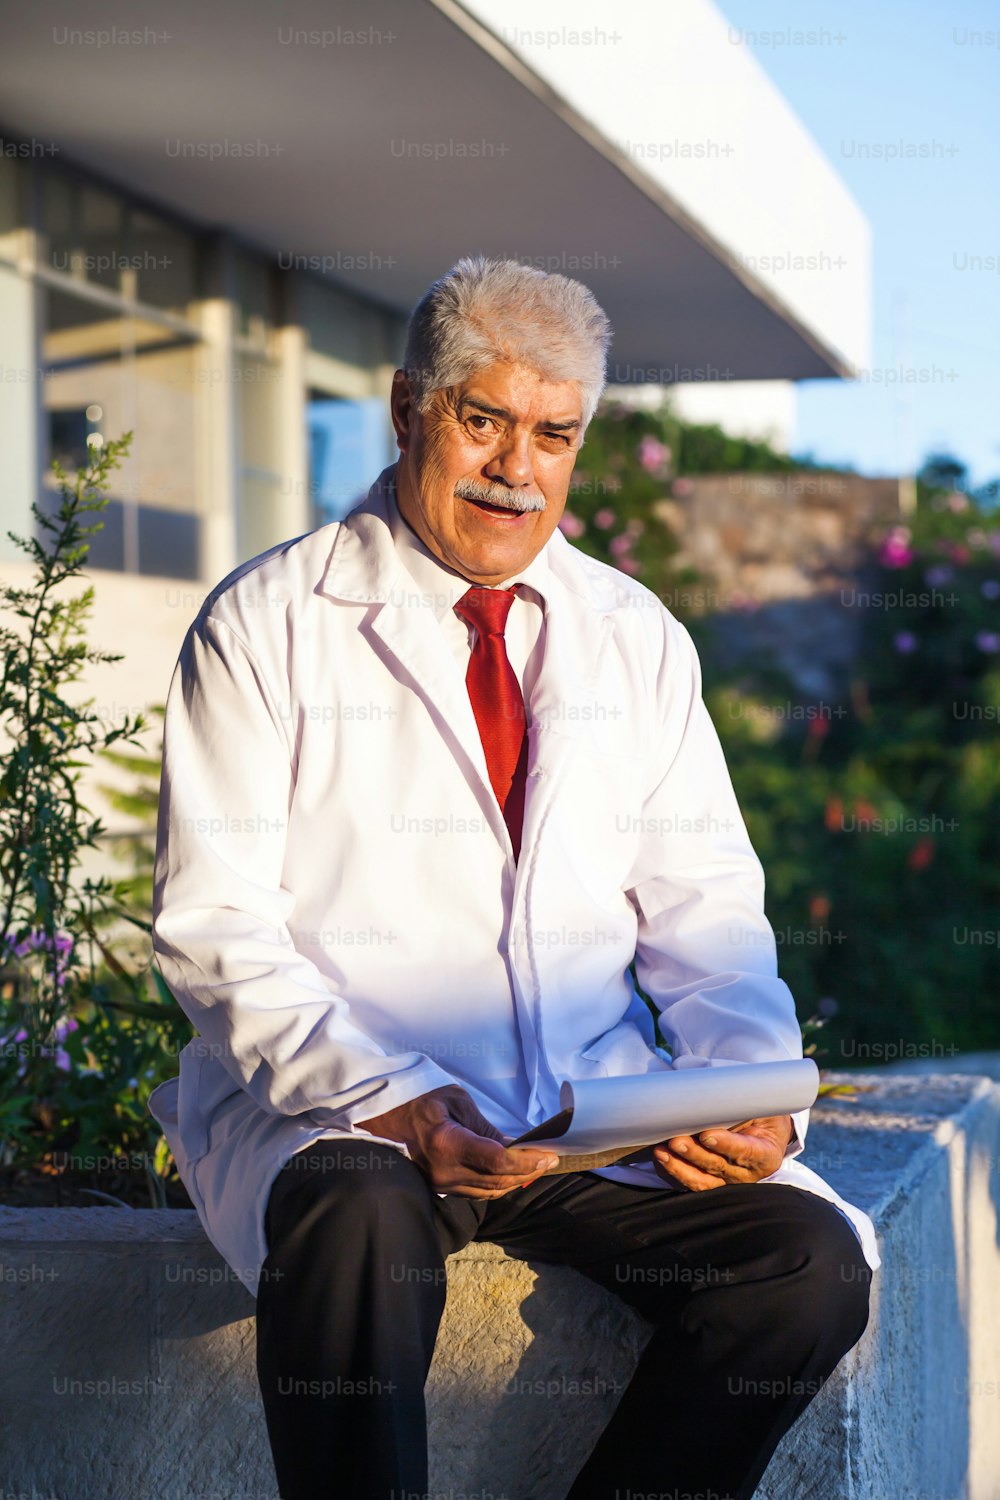 Latin man senior doctor in a Mexican hospital in Mexico city or Latin America